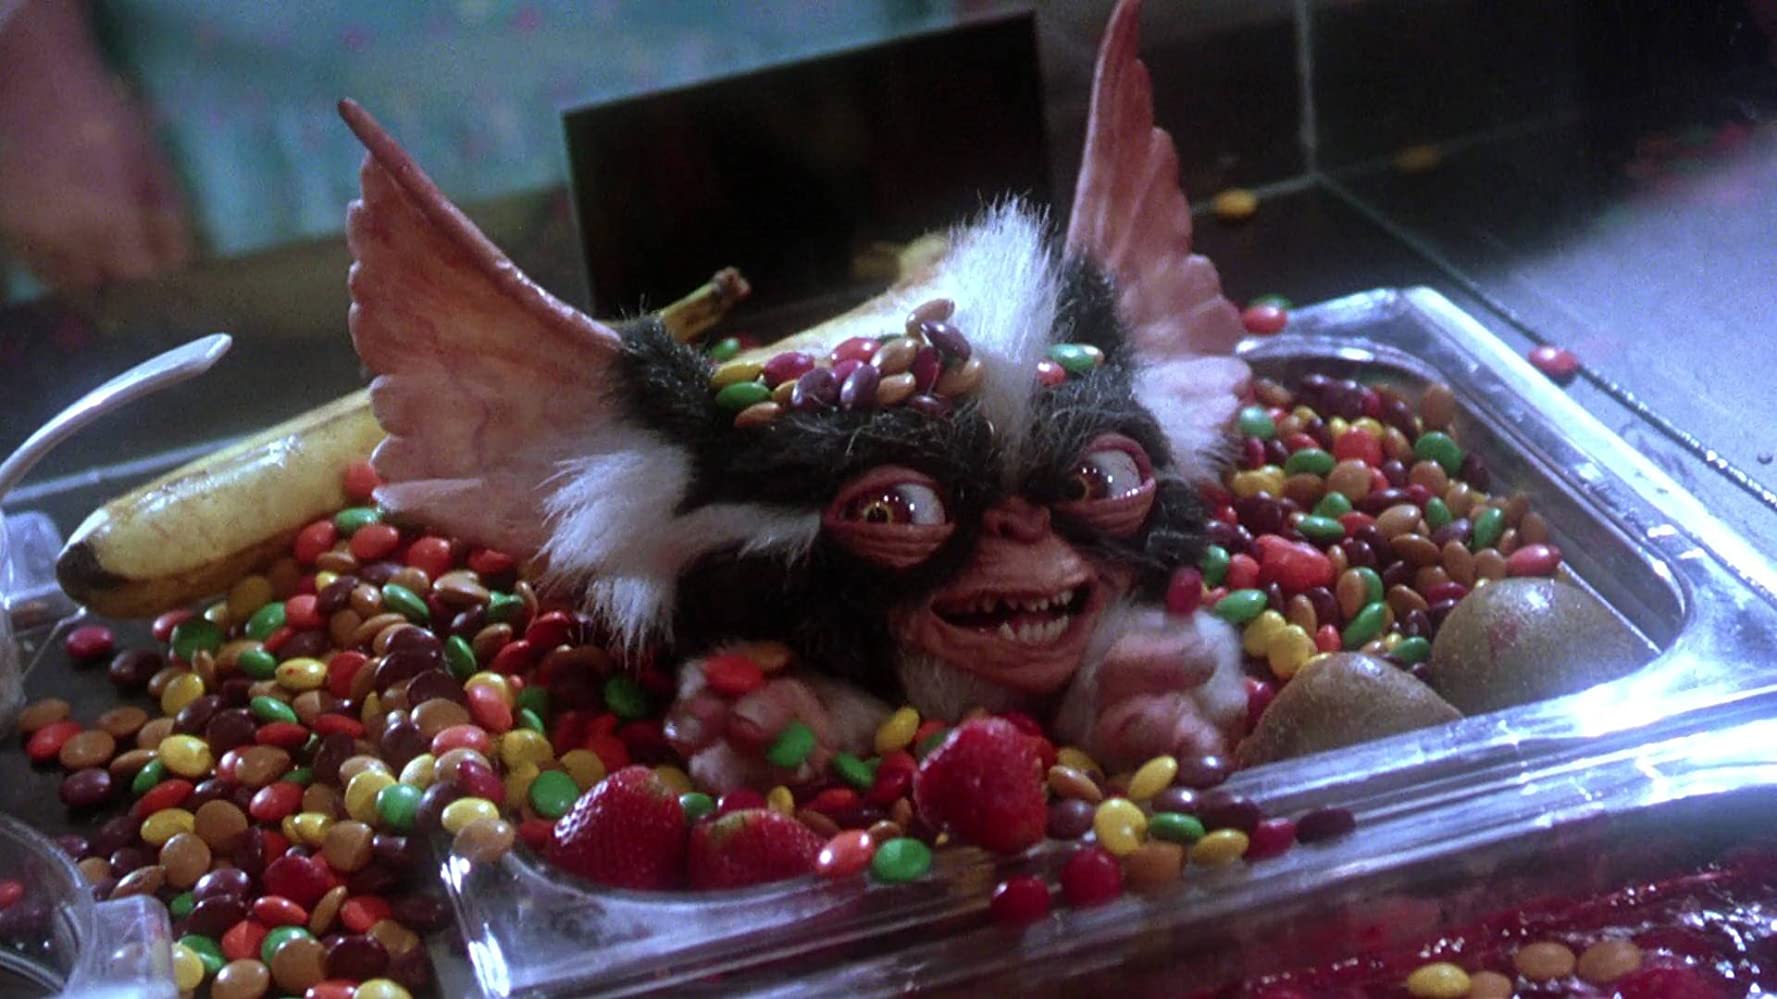 How the Gremlins 2 Creators Feel About Their Donald Trump Parody